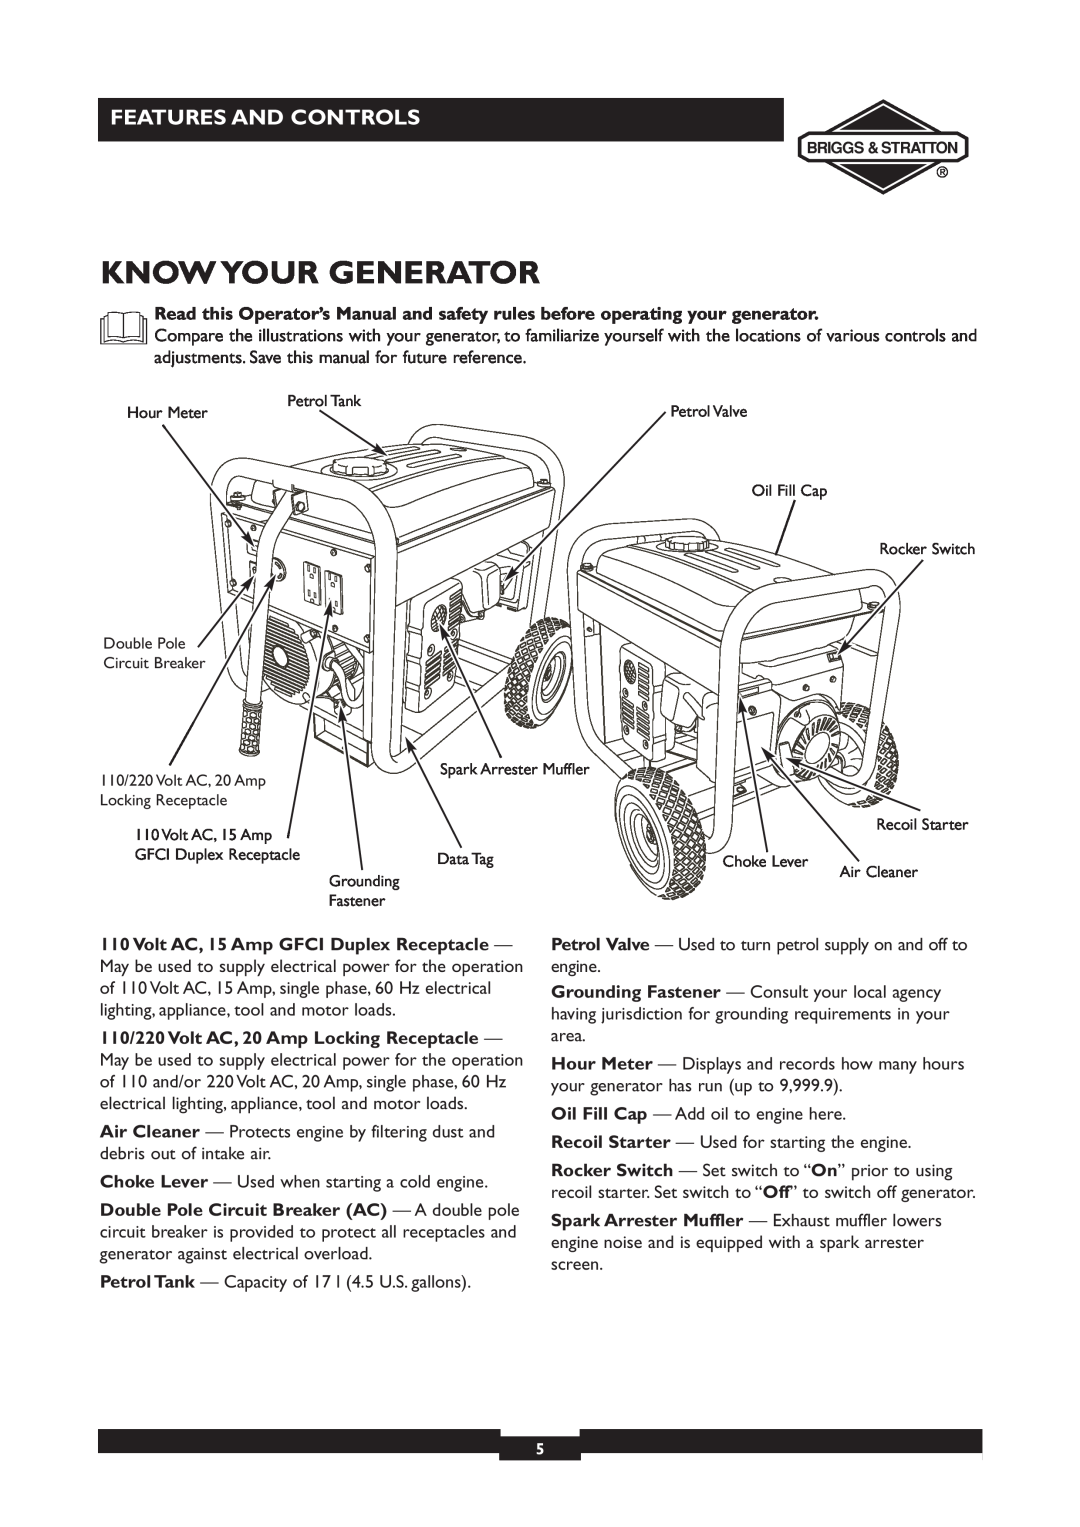 Briggs & Stratton 30231 manual Know Your Generator, Features And Controls 